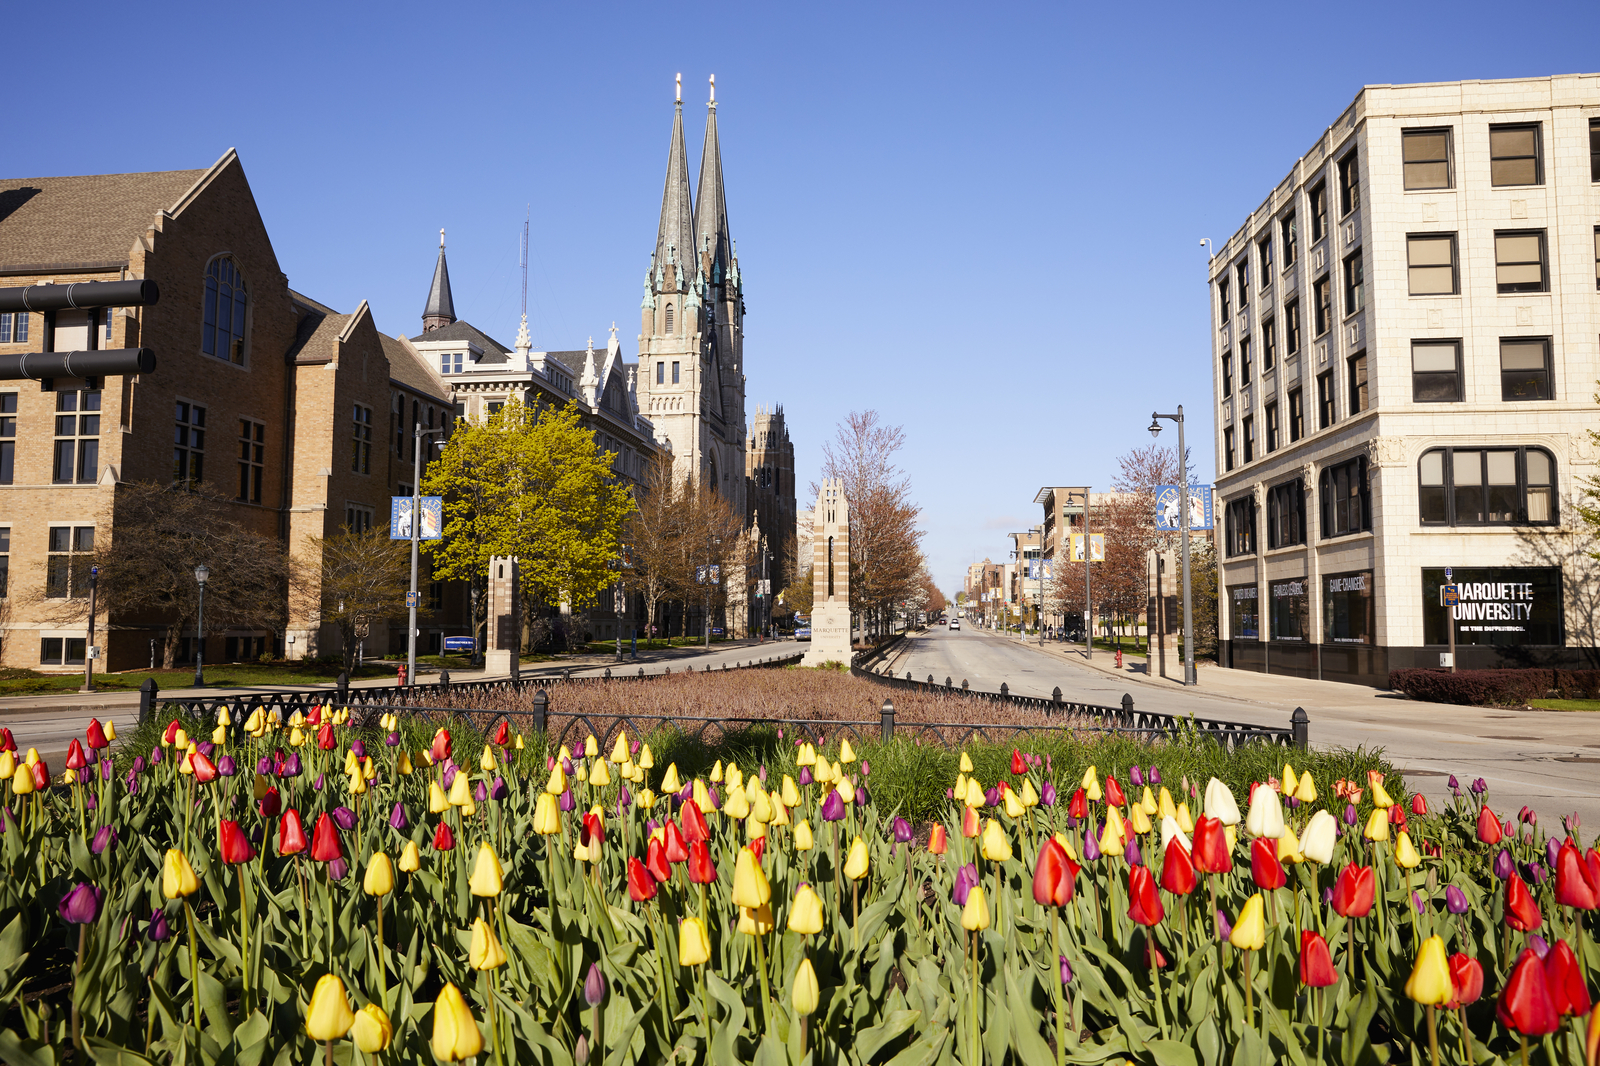 Image of Marquette's campus in the Spring